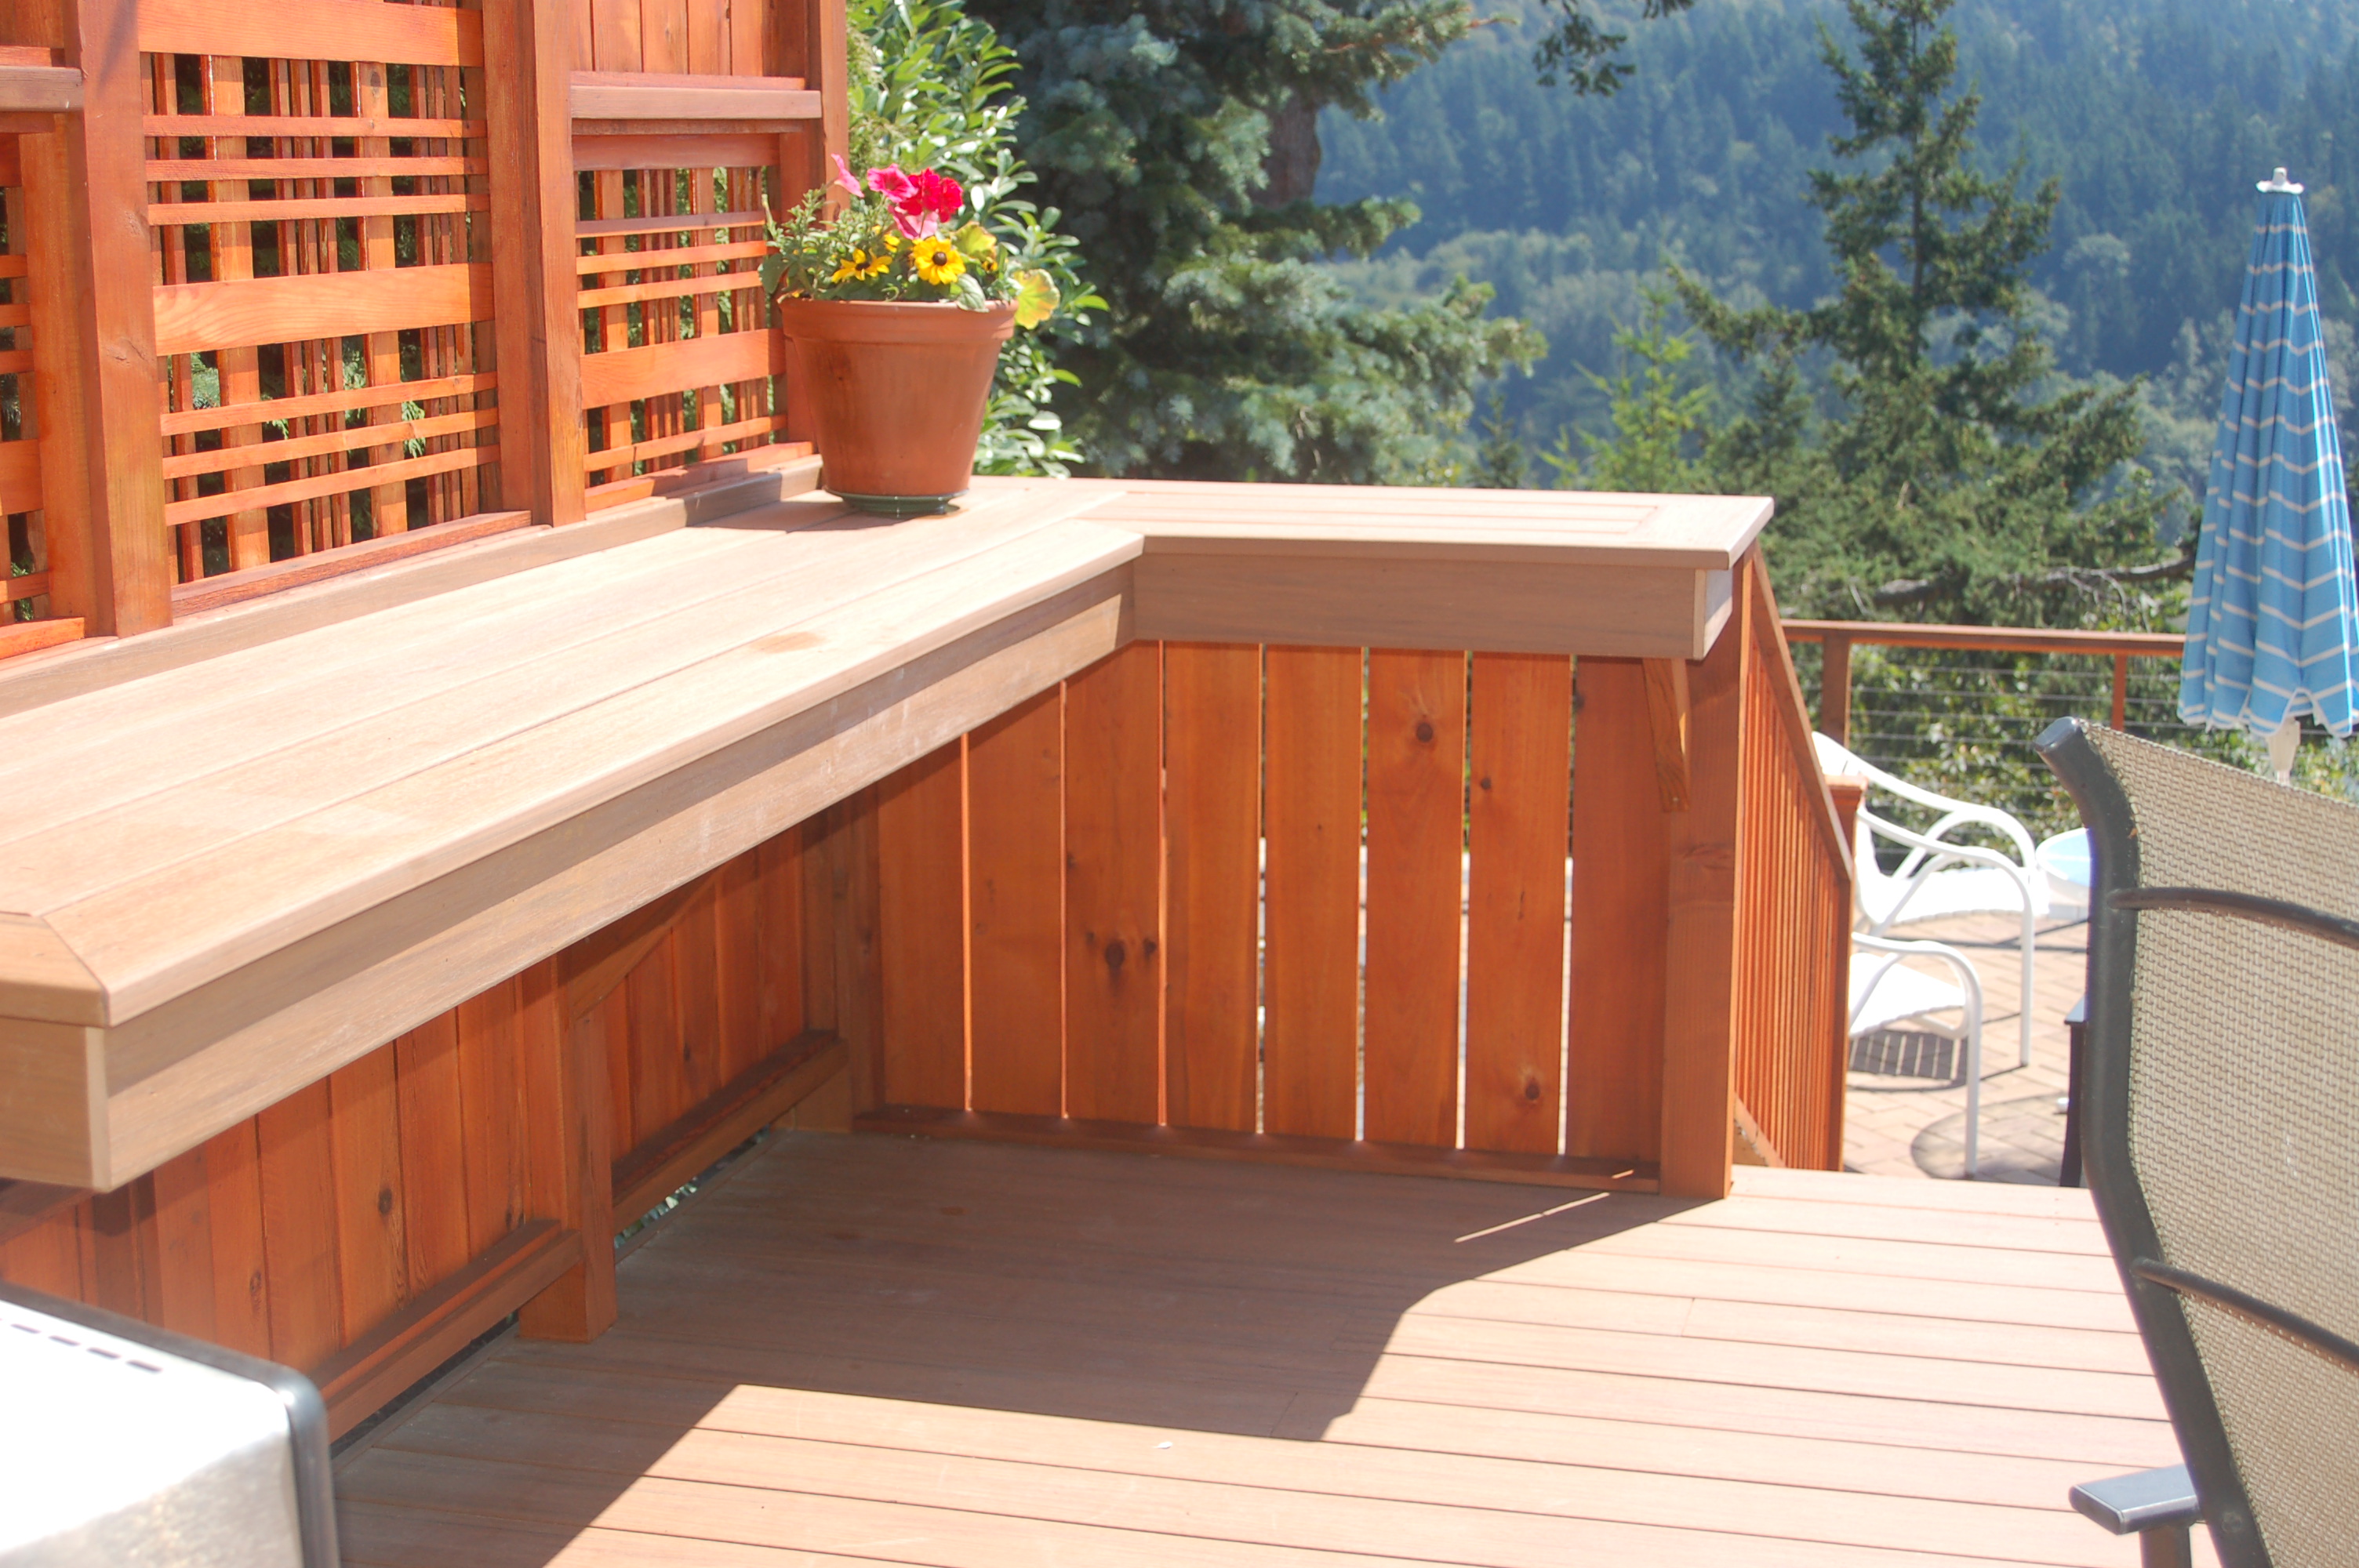 New deck with countertop and privacy screen